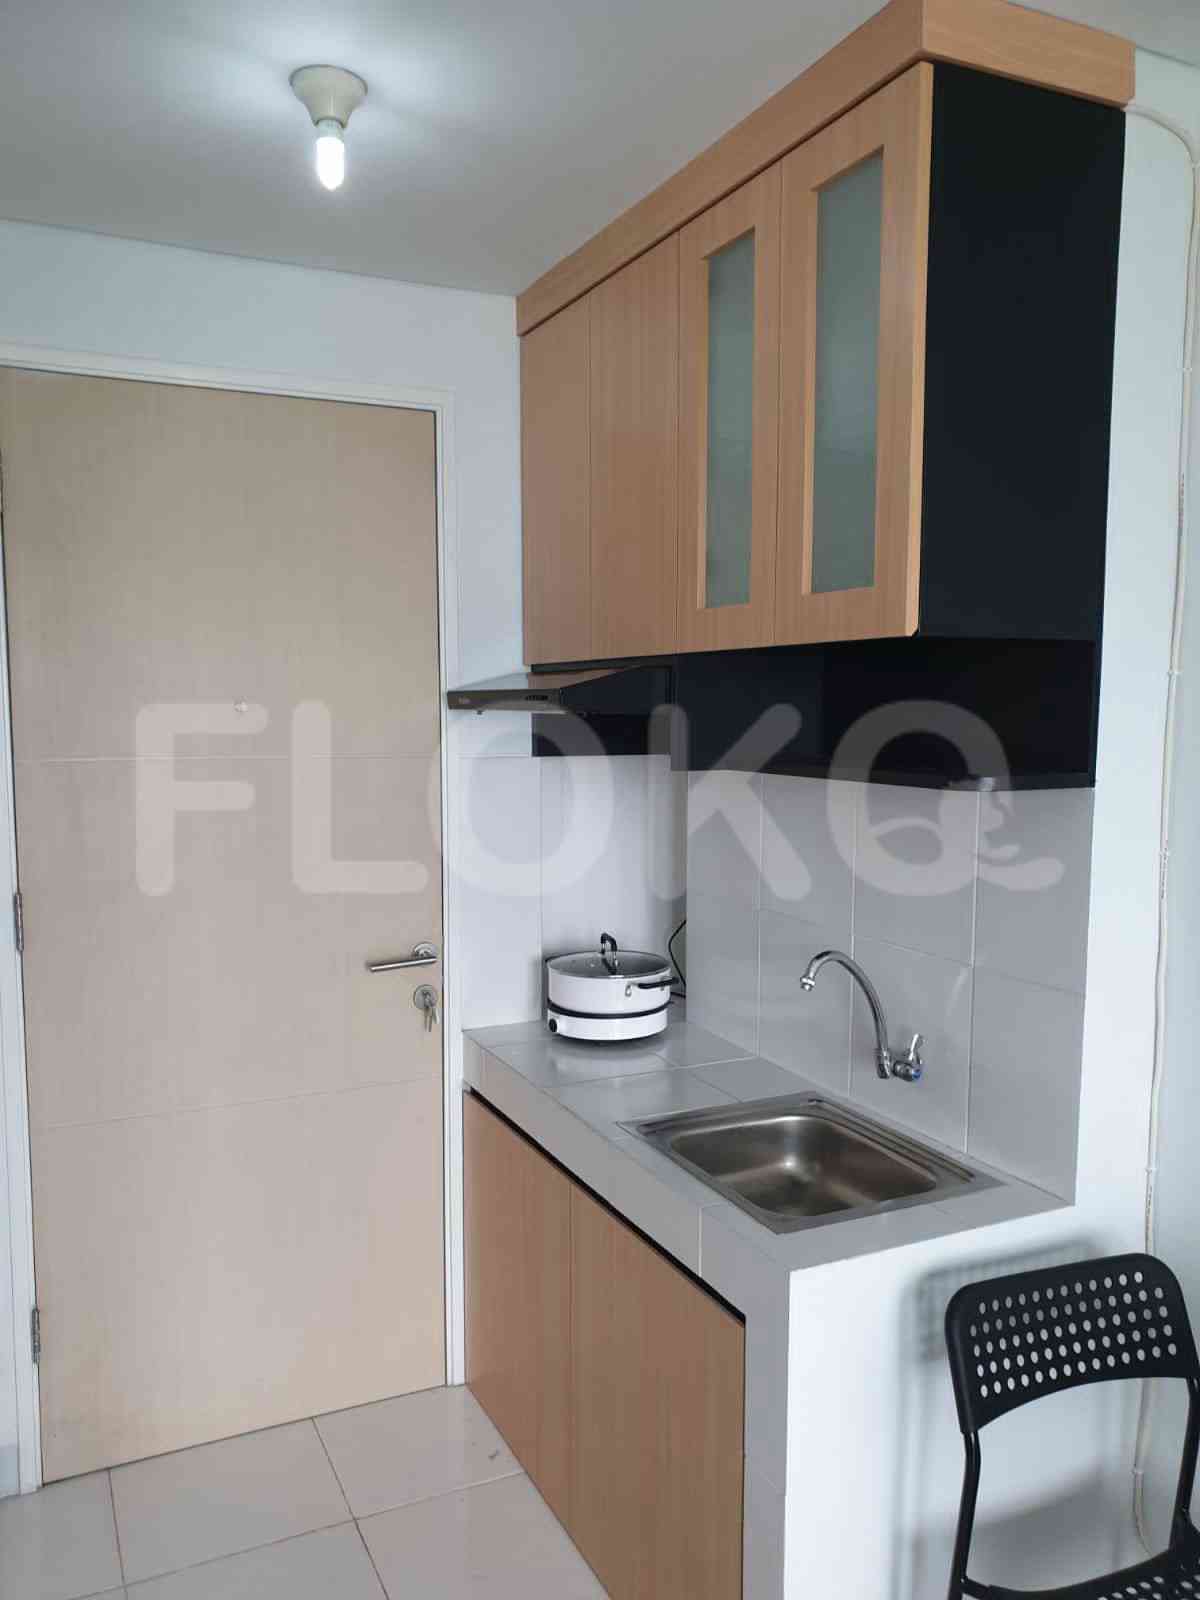 1 Bedroom on 17th Floor for Rent in Kota Ayodhya Apartment - fci17f 4